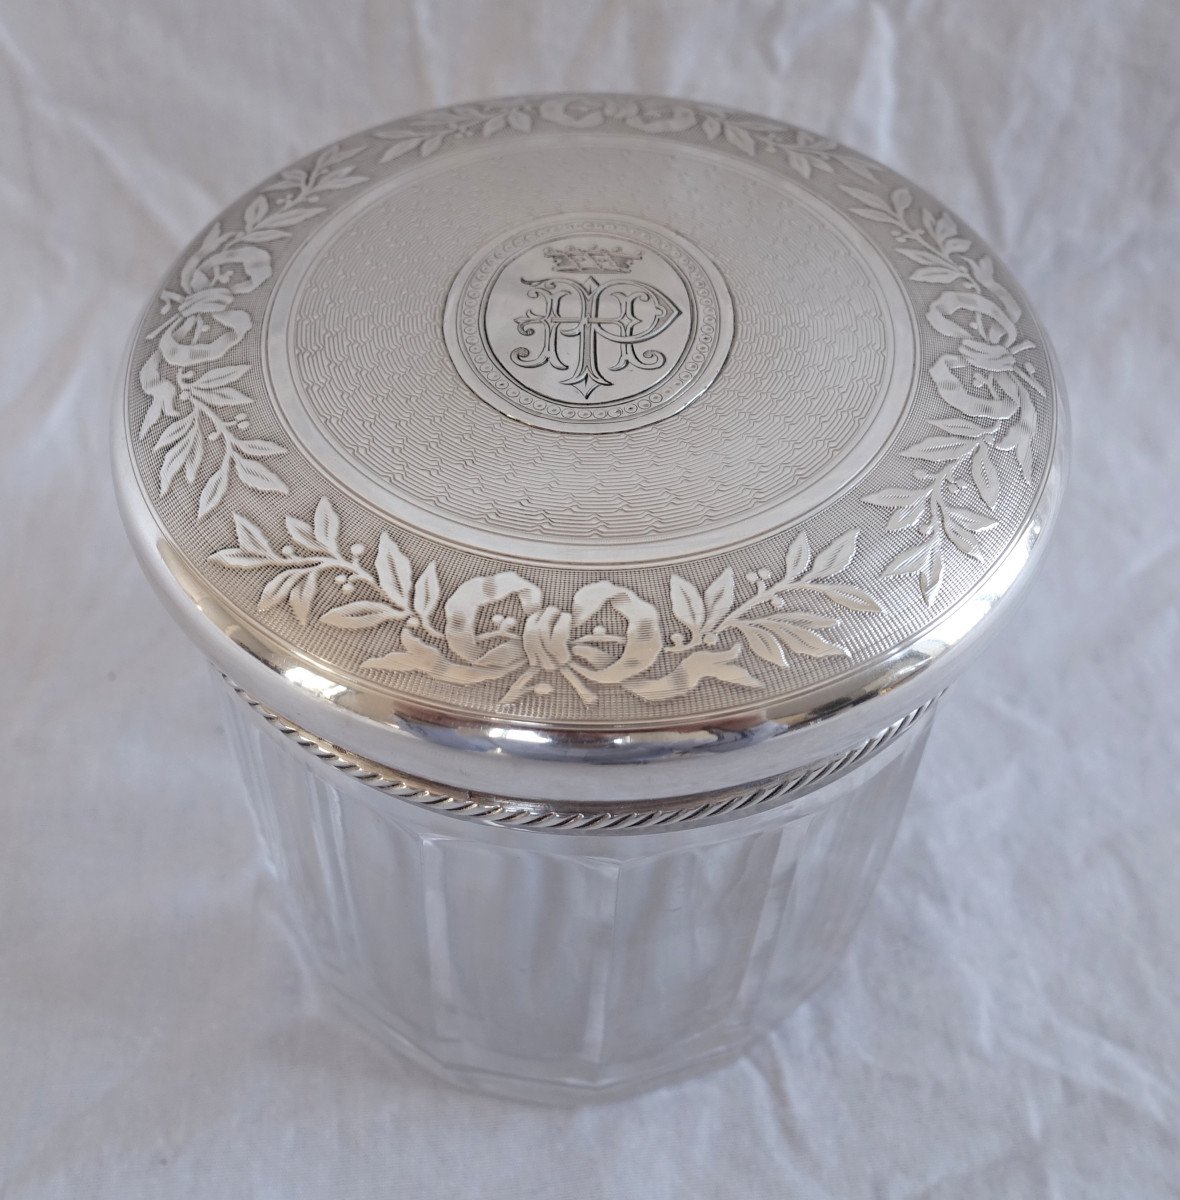 Baron's Crown - Very Large Crystal And Sterling Silver Box - France, Minerva Hallmark-photo-3